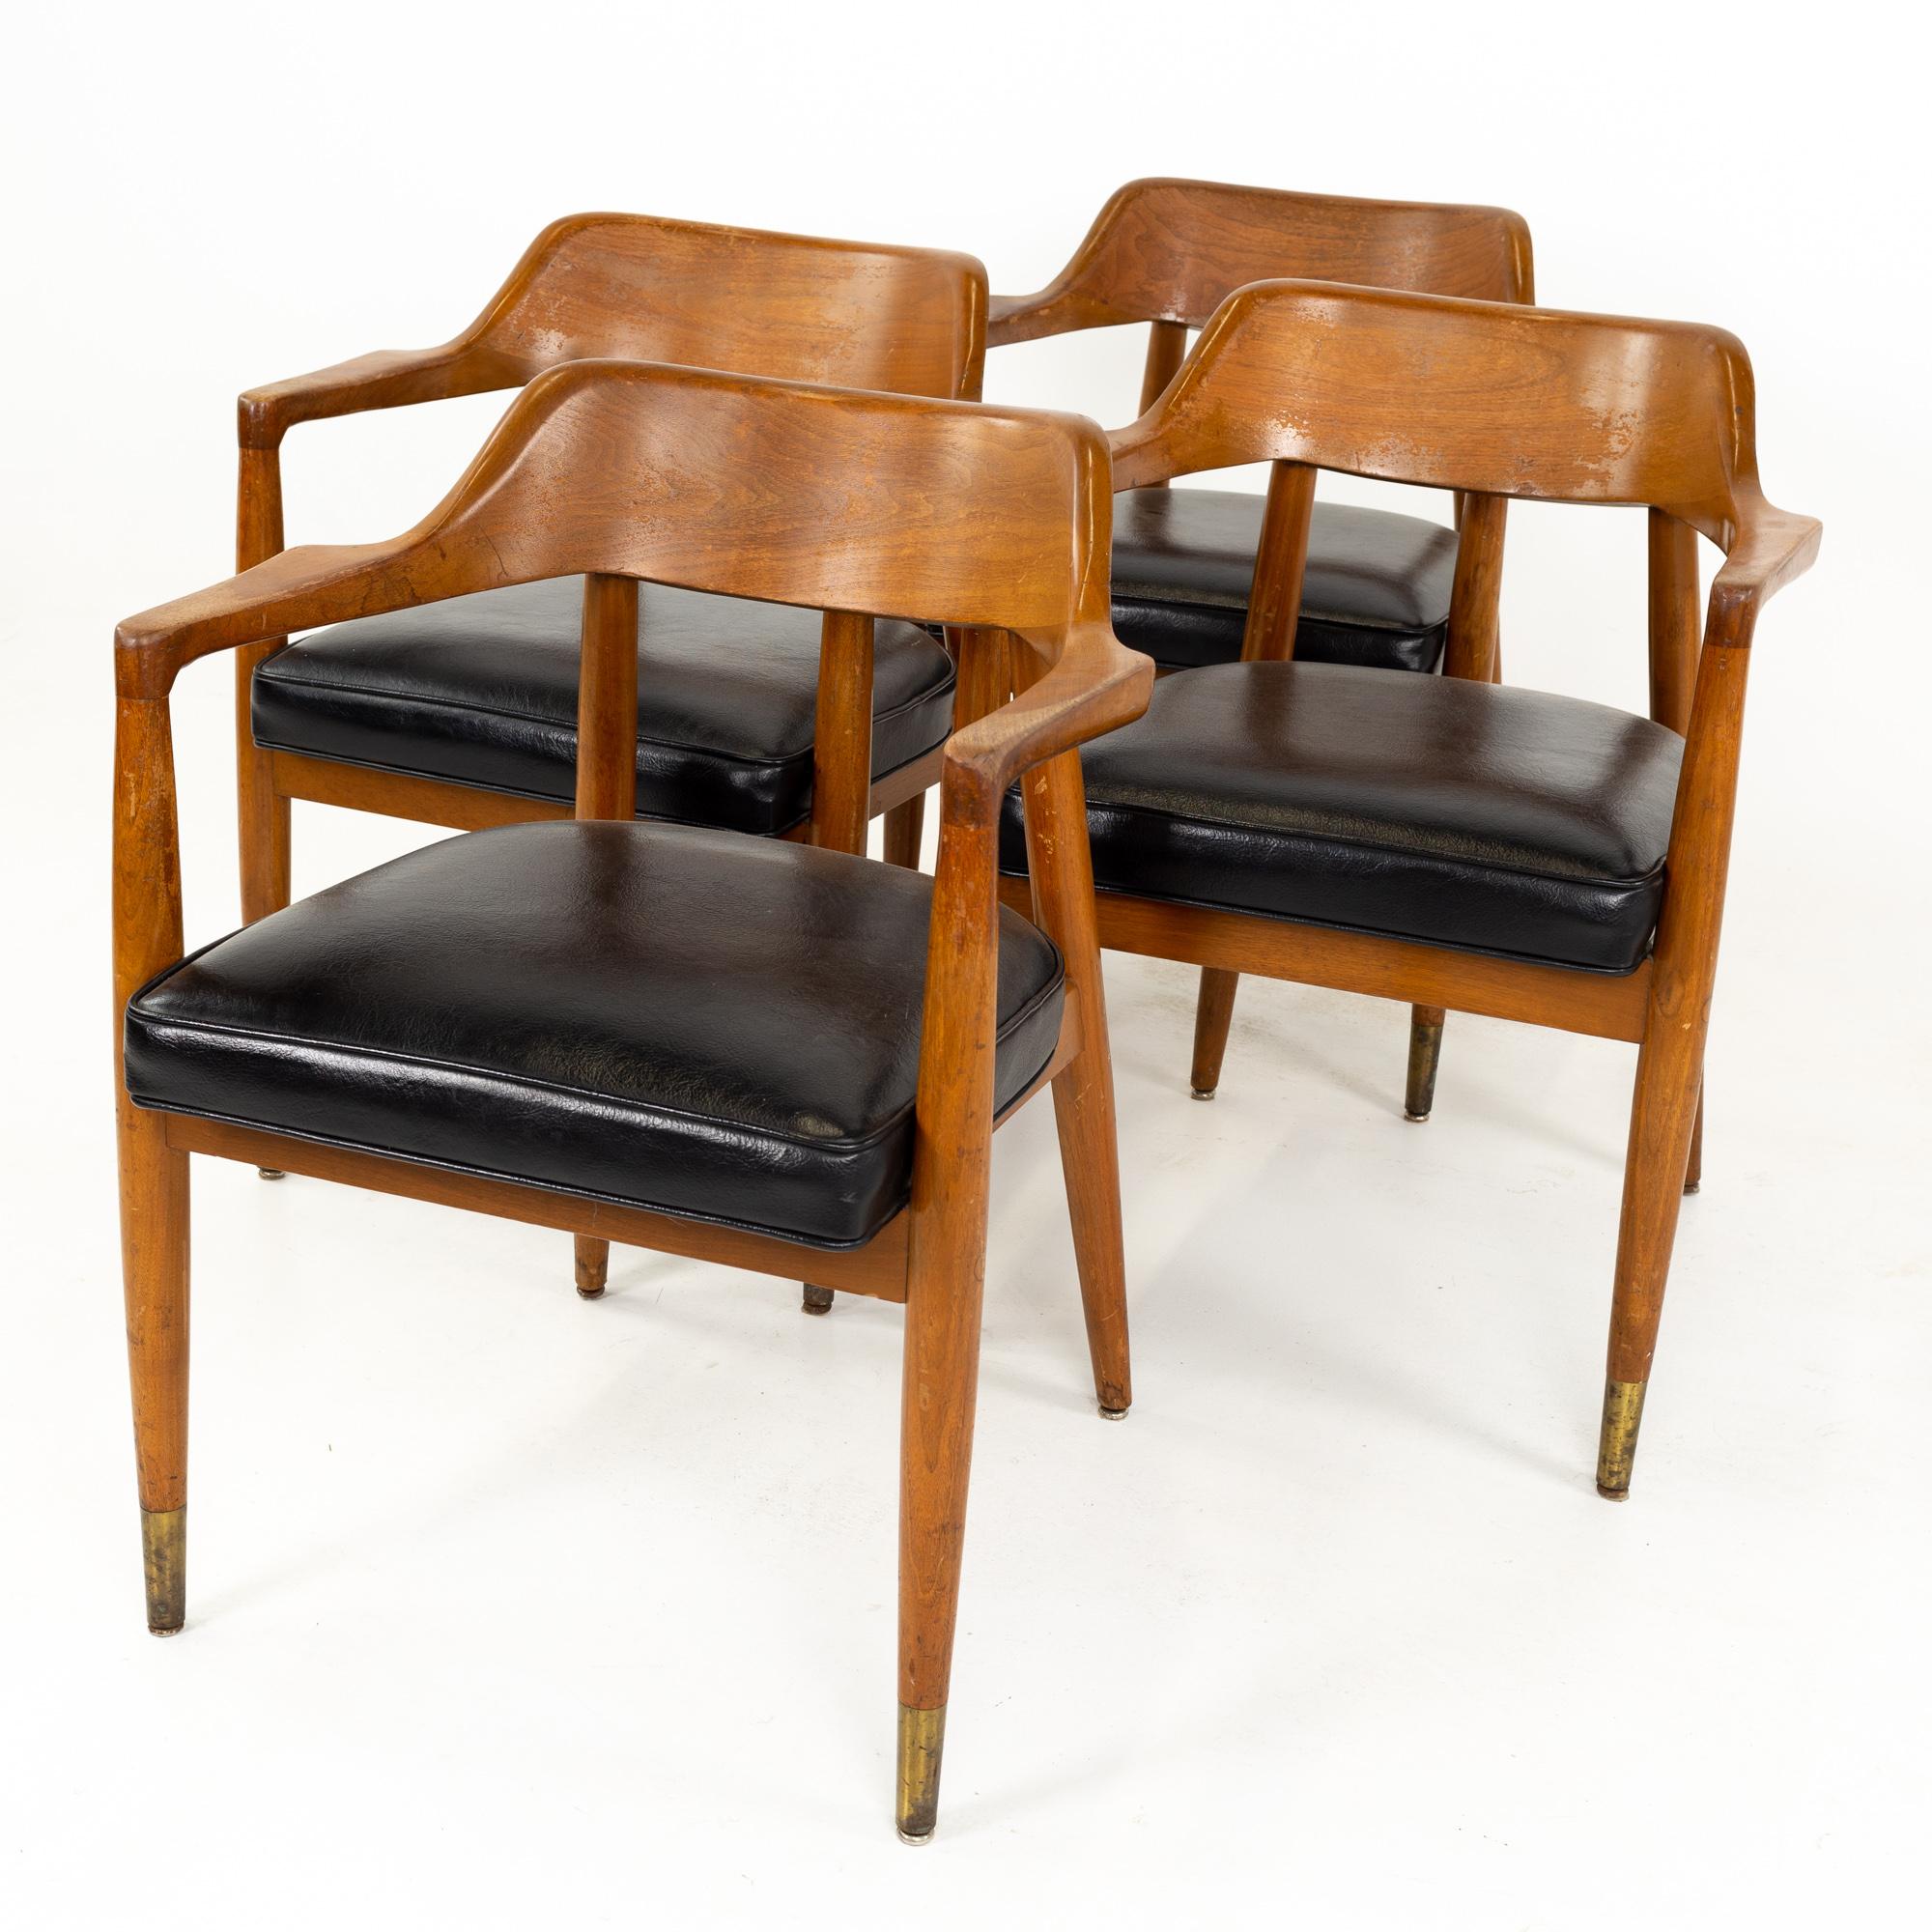 Paoli mid century walnut dining occasional chairs - Set of 4
These chairs are 23.5 wide x 23 deep x 30.75 inches high, with a seat height of 19 and arm height of 27.25 inches 

All pieces of furniture can be had in what we call restored vintage